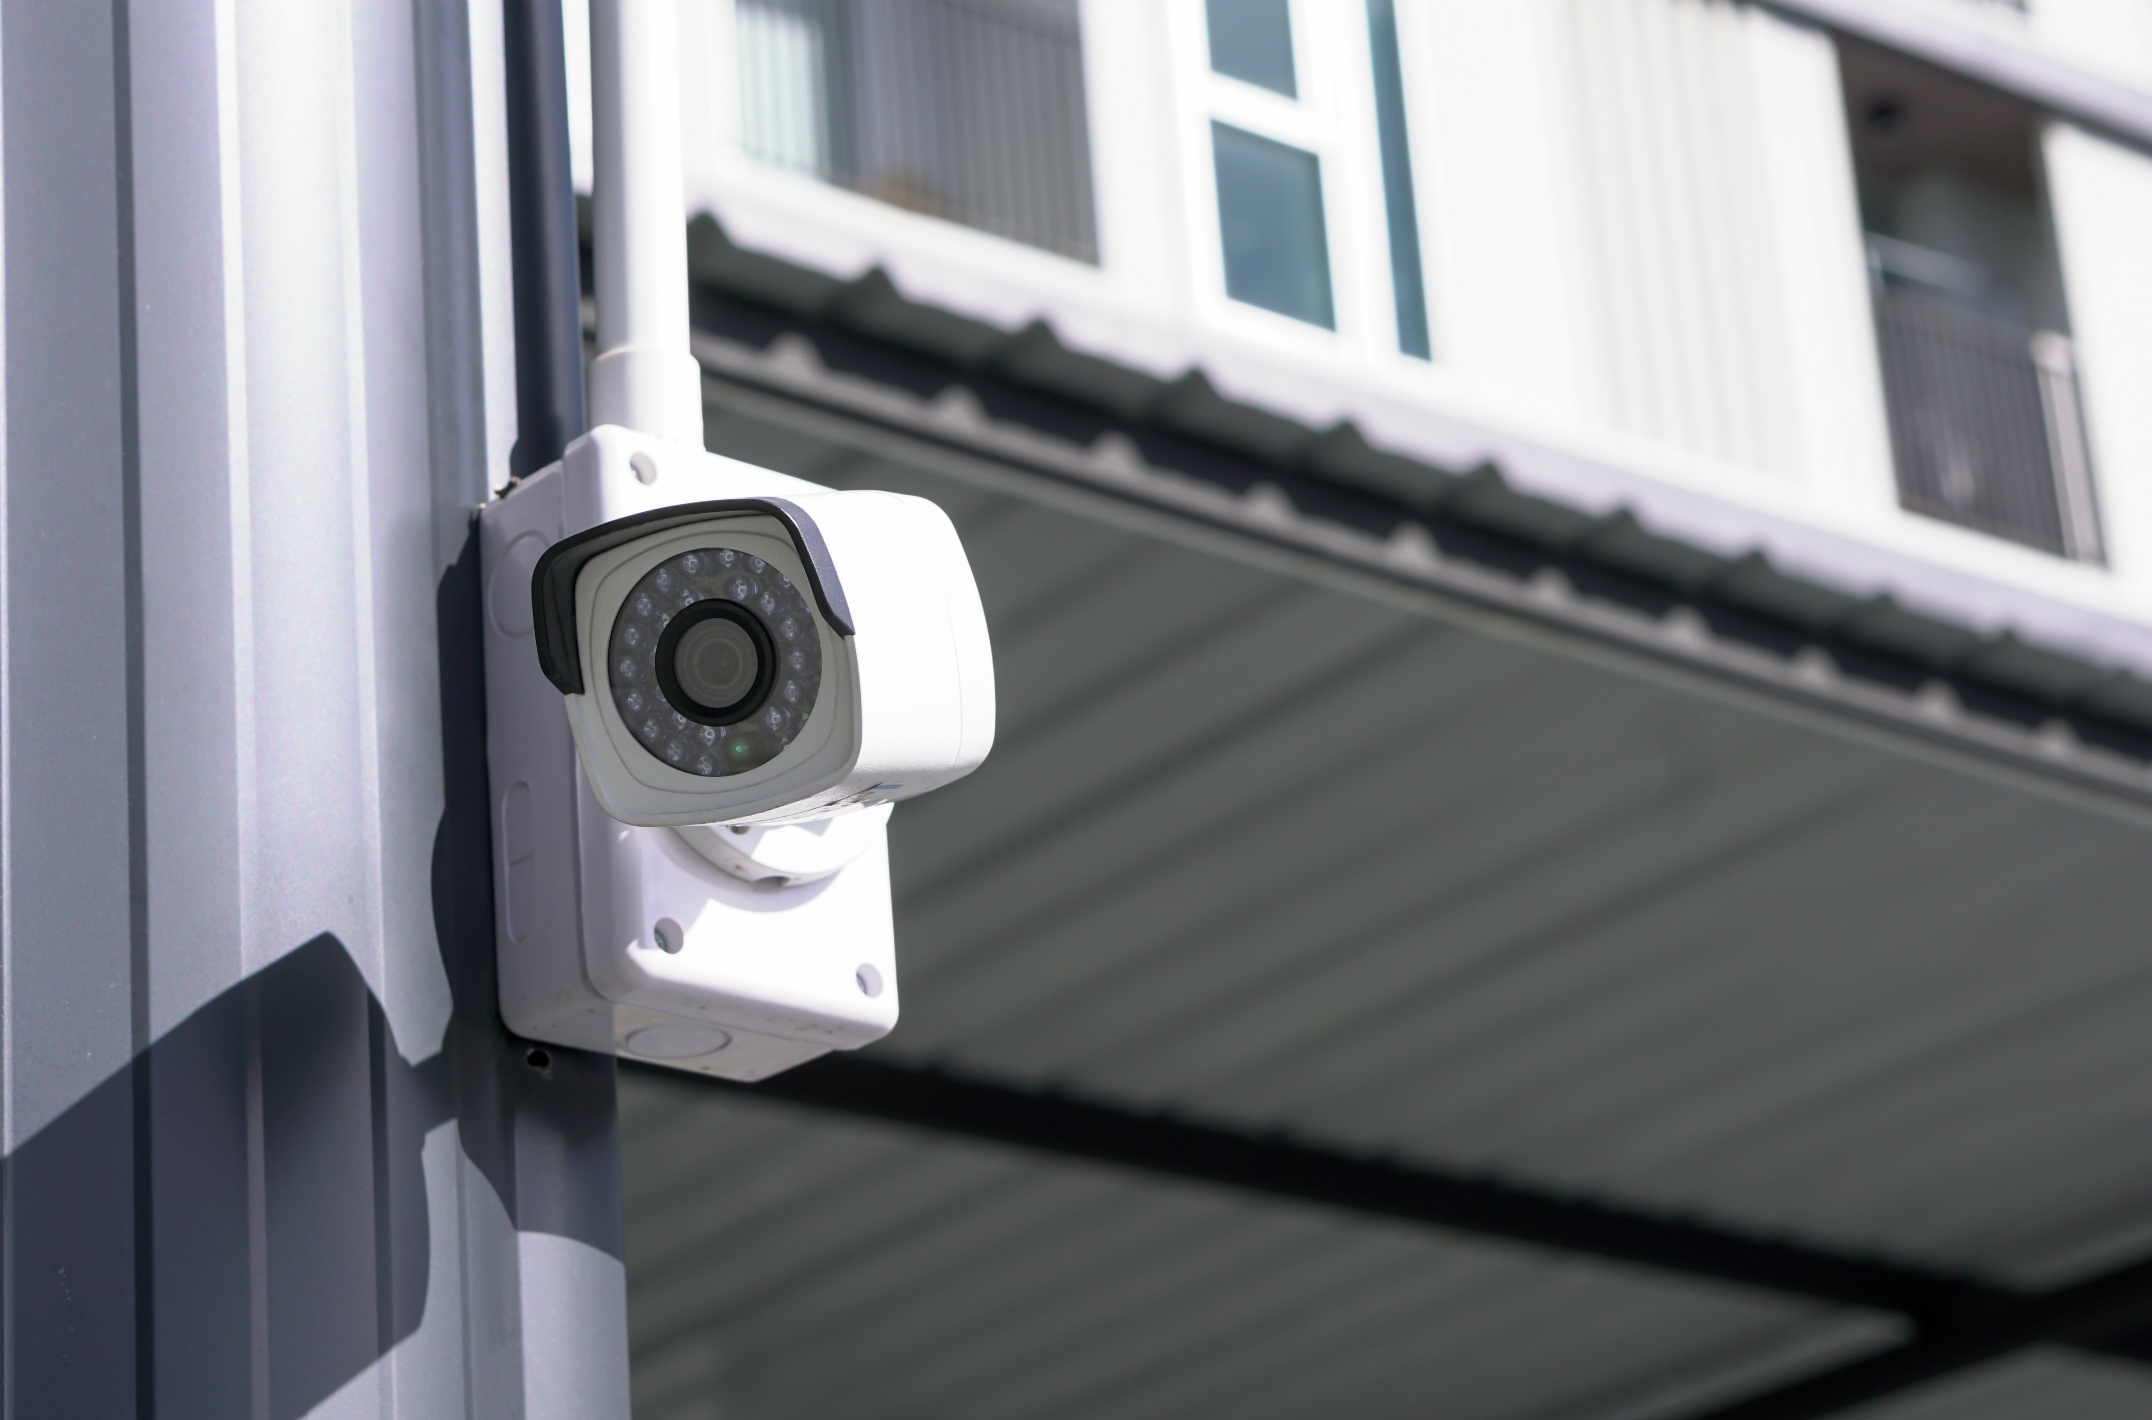 cctv-camera-install-entrance-door-private-house-retail-warehouse